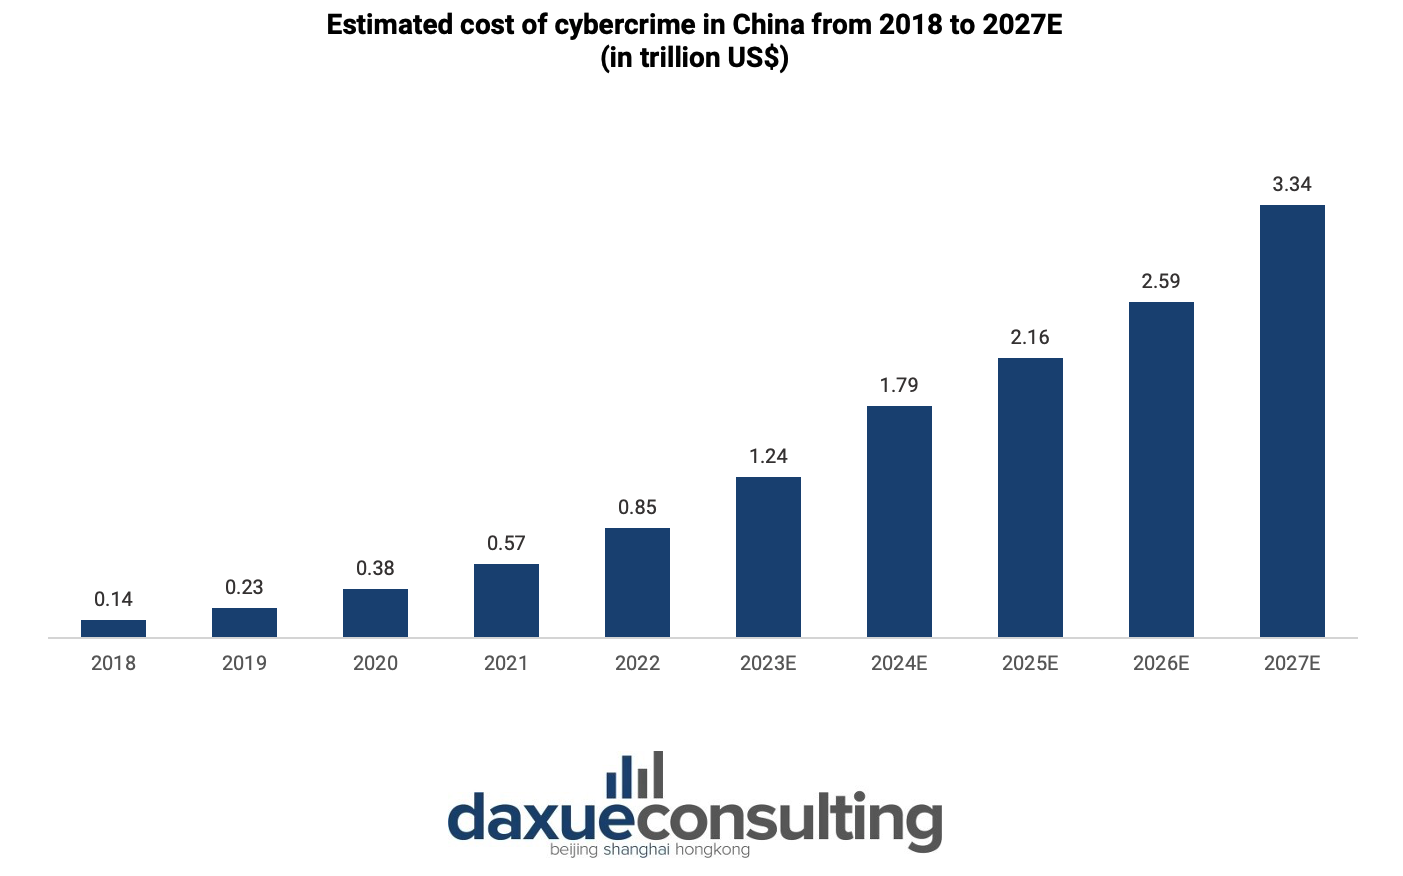 china's cybersecurity industry:  Estimated cost of cybercrime